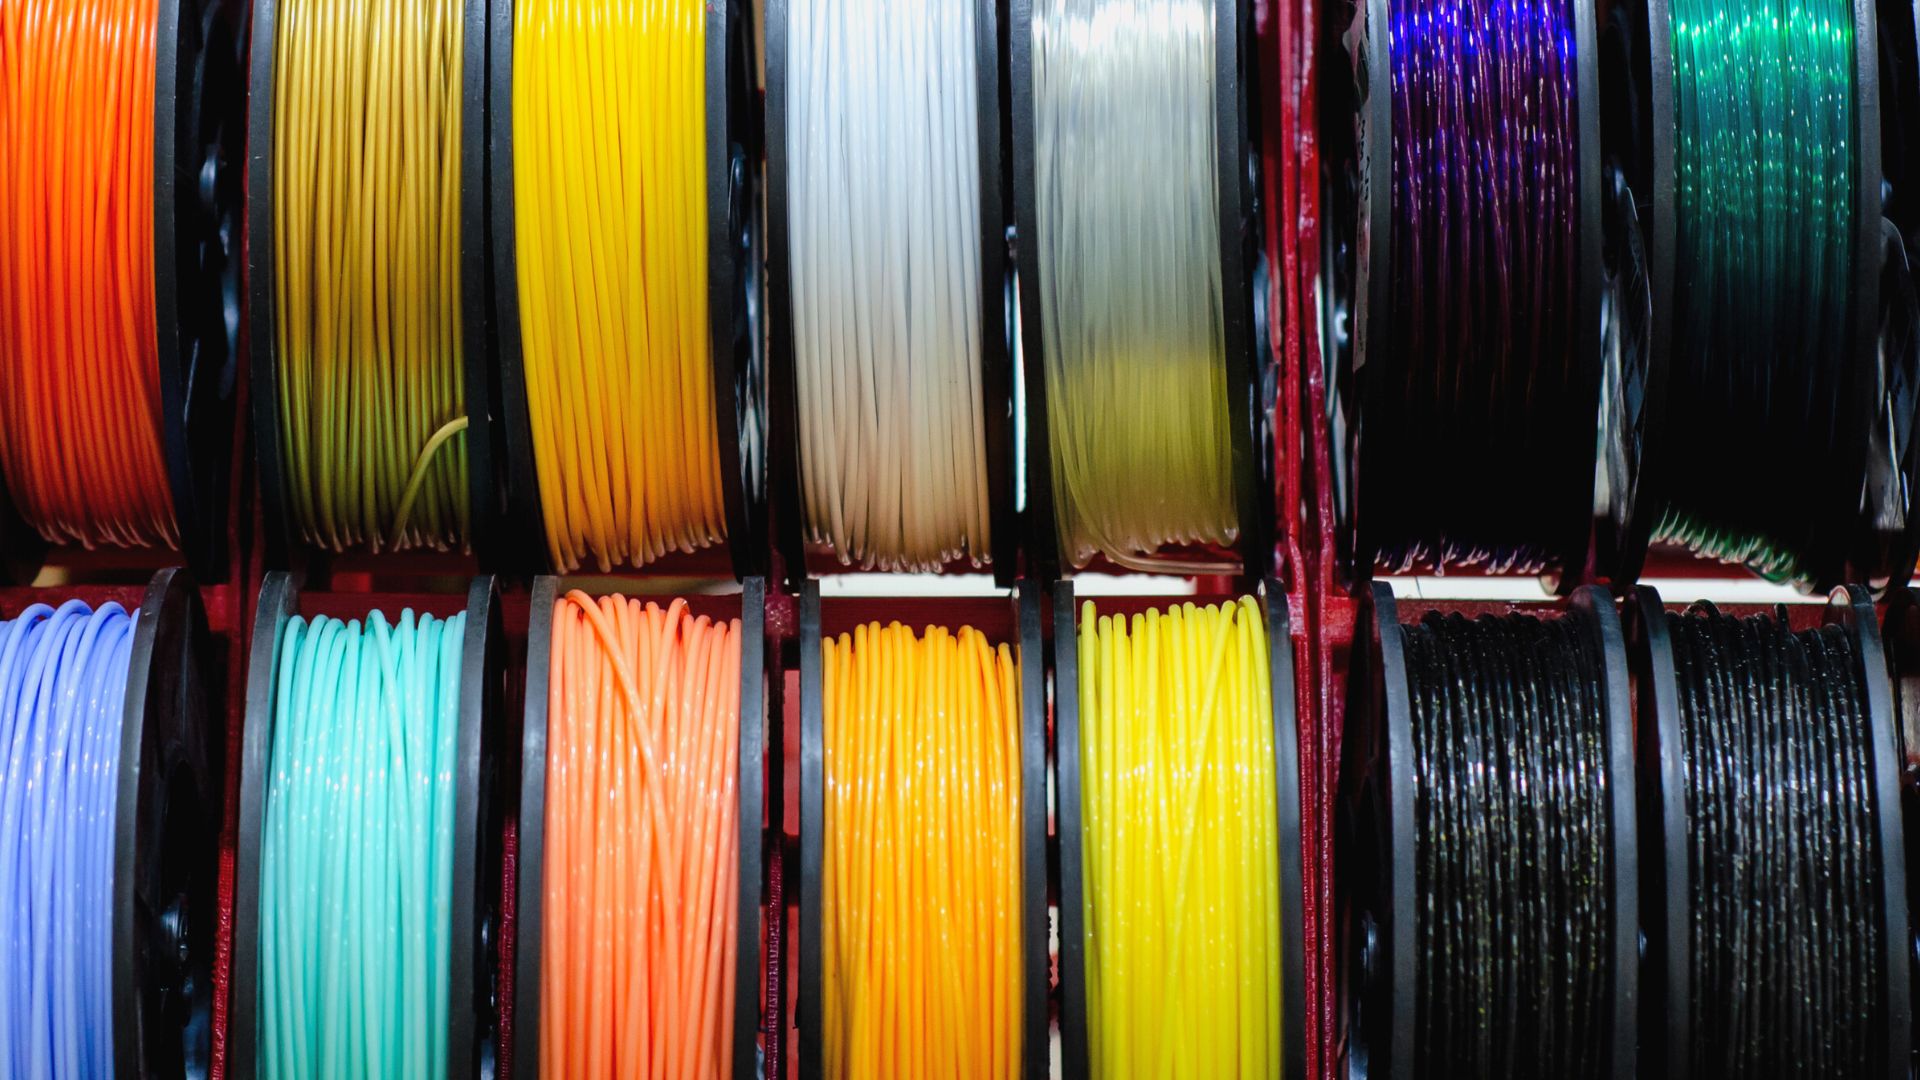 All You Need To Know About Conductive PLA Filaments